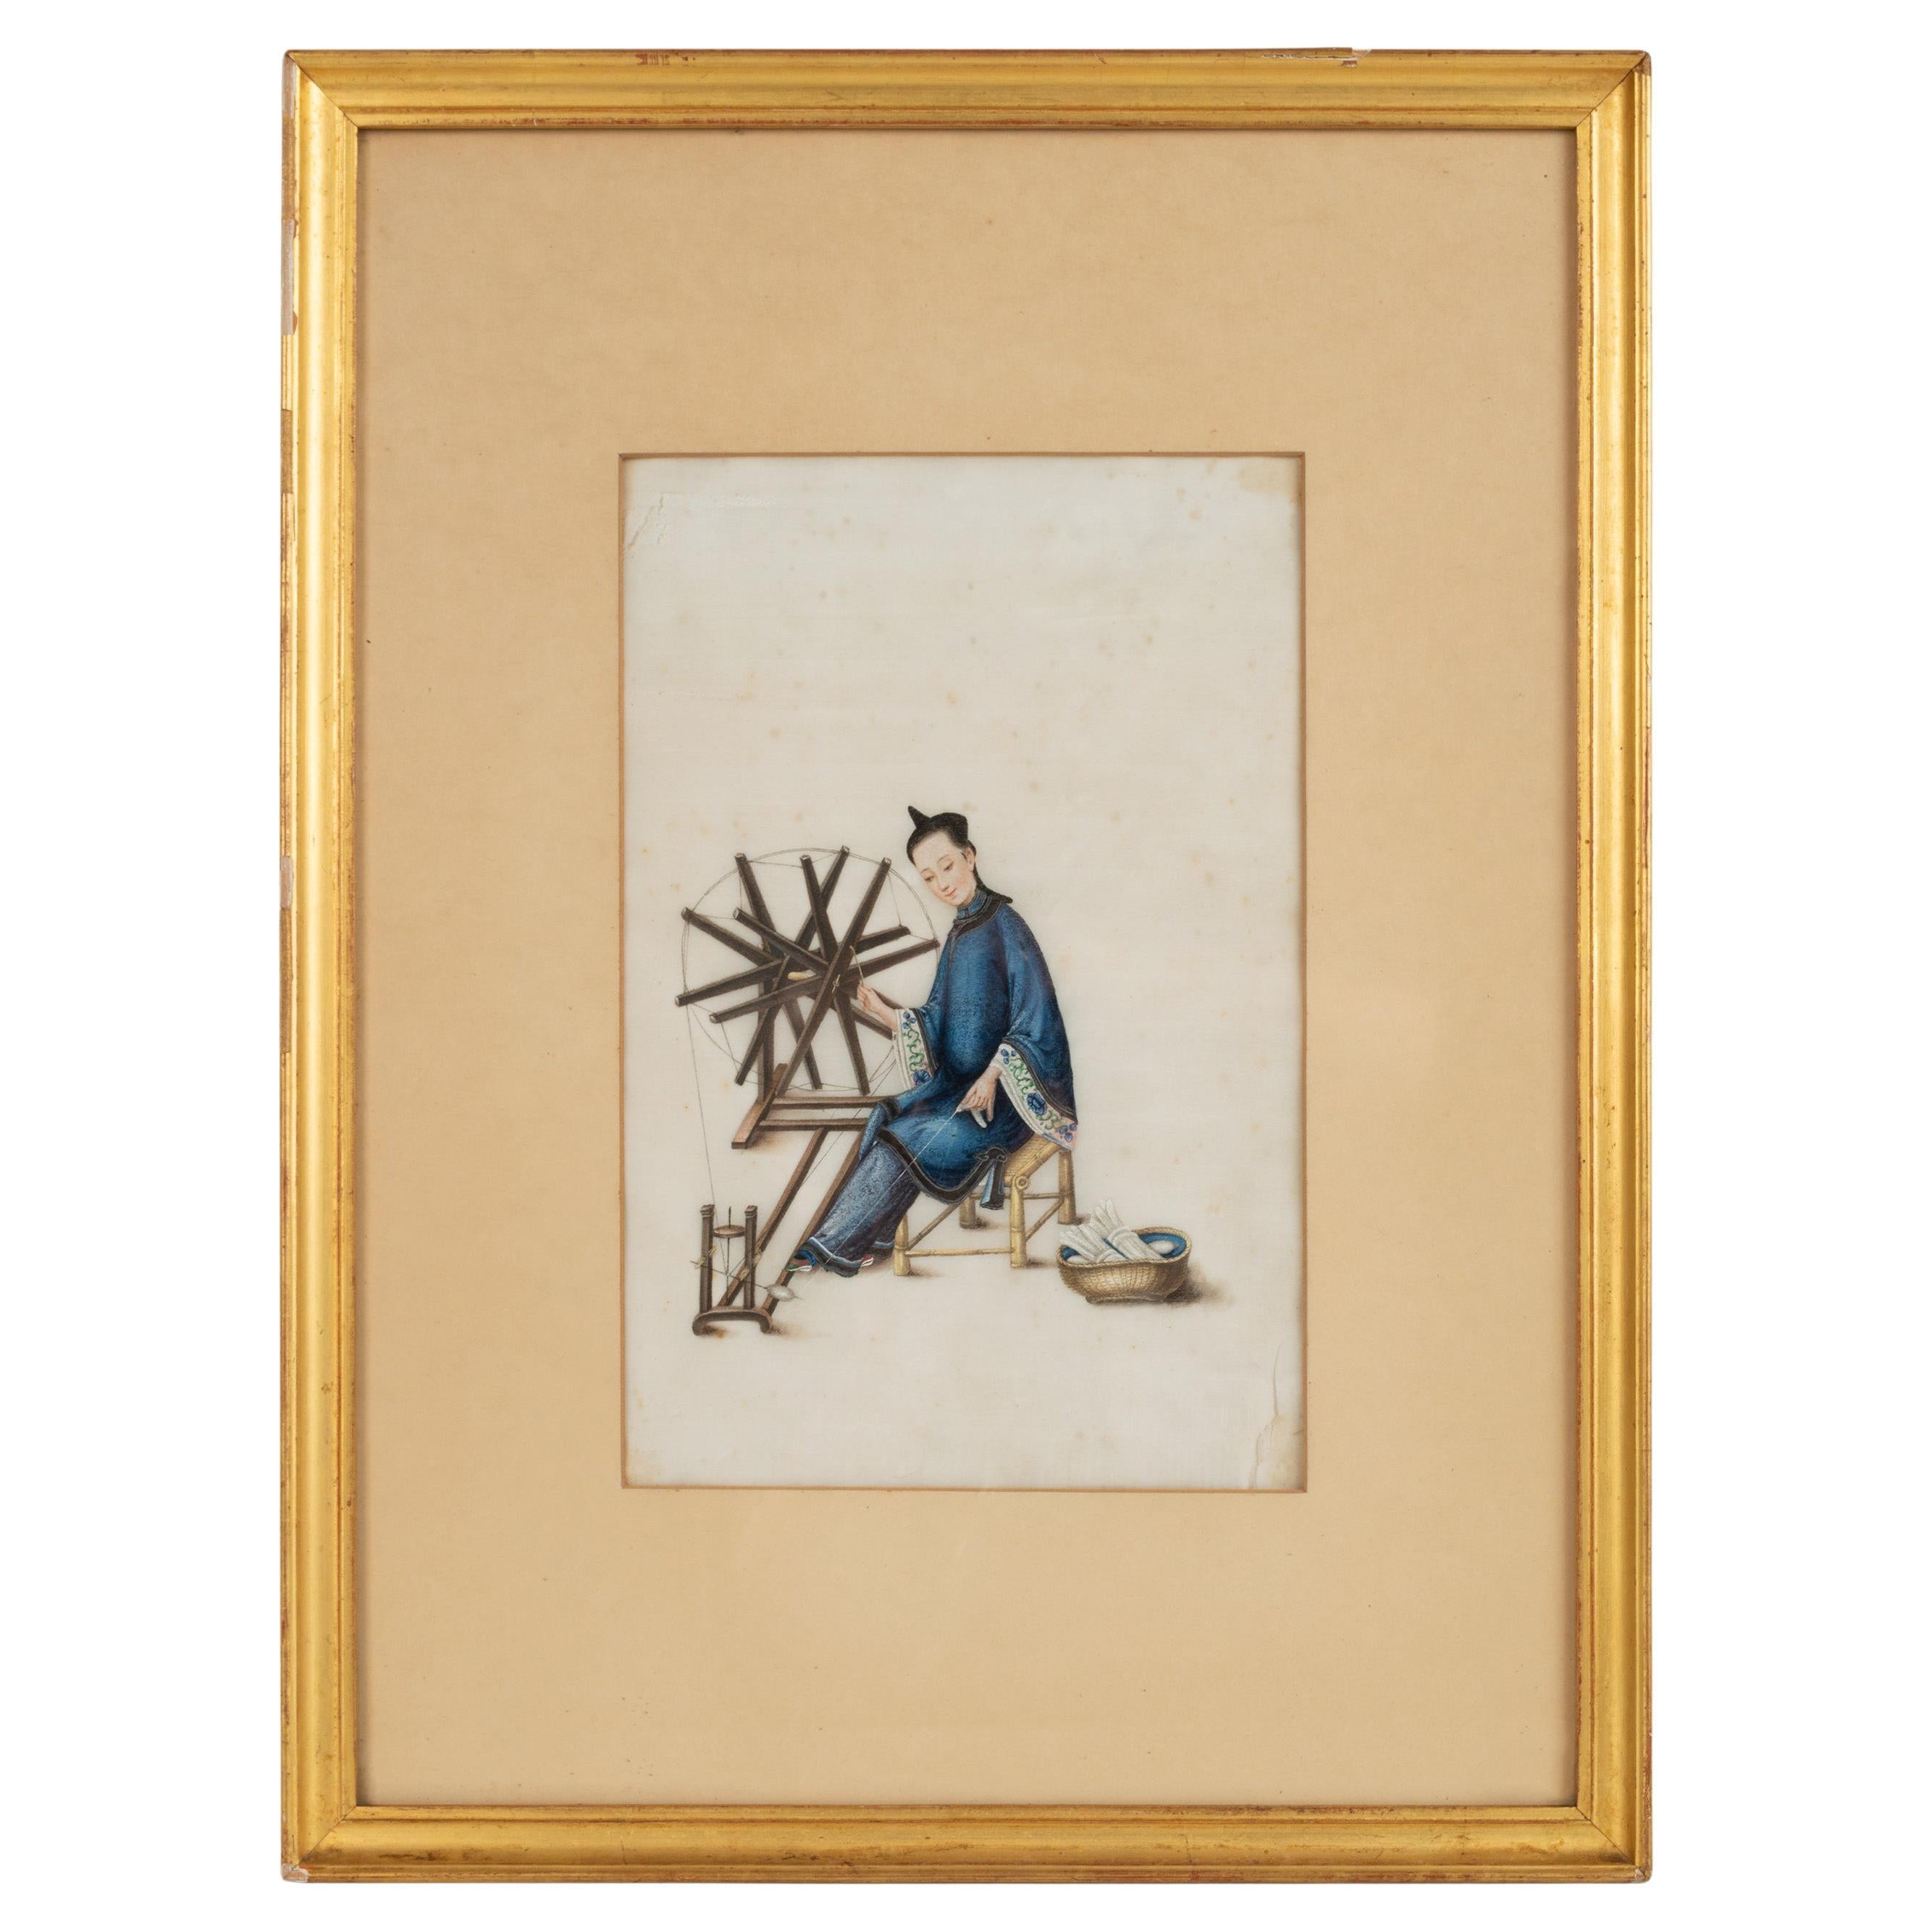 Chinese Qing Dynasty watercolour and gouache on Pith paper, Canton C.1835.

Capturing Canton life, the image of a women weaving depicts daily life in Qing Dynasty China. This export paintings were known for their skill and vibrancy of colour.

A